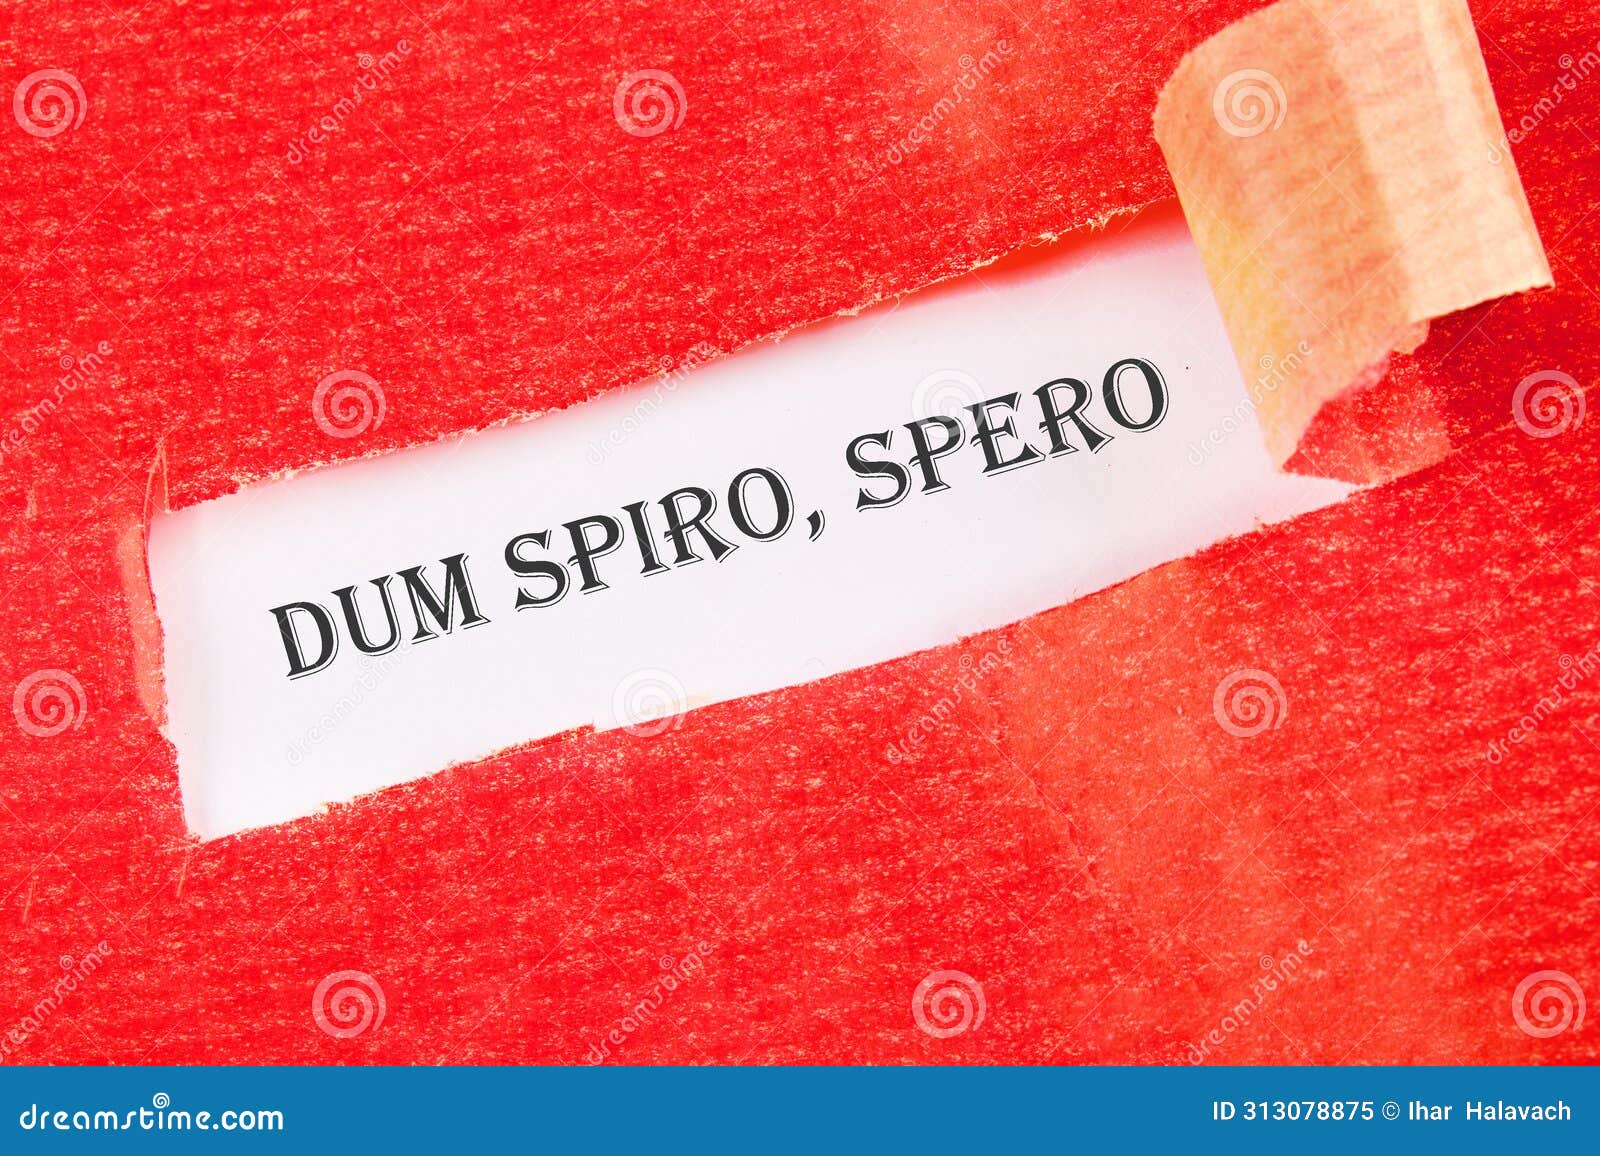 dum spiro spero - latin phrase means while i breath, i hope. on a white background under torn paper